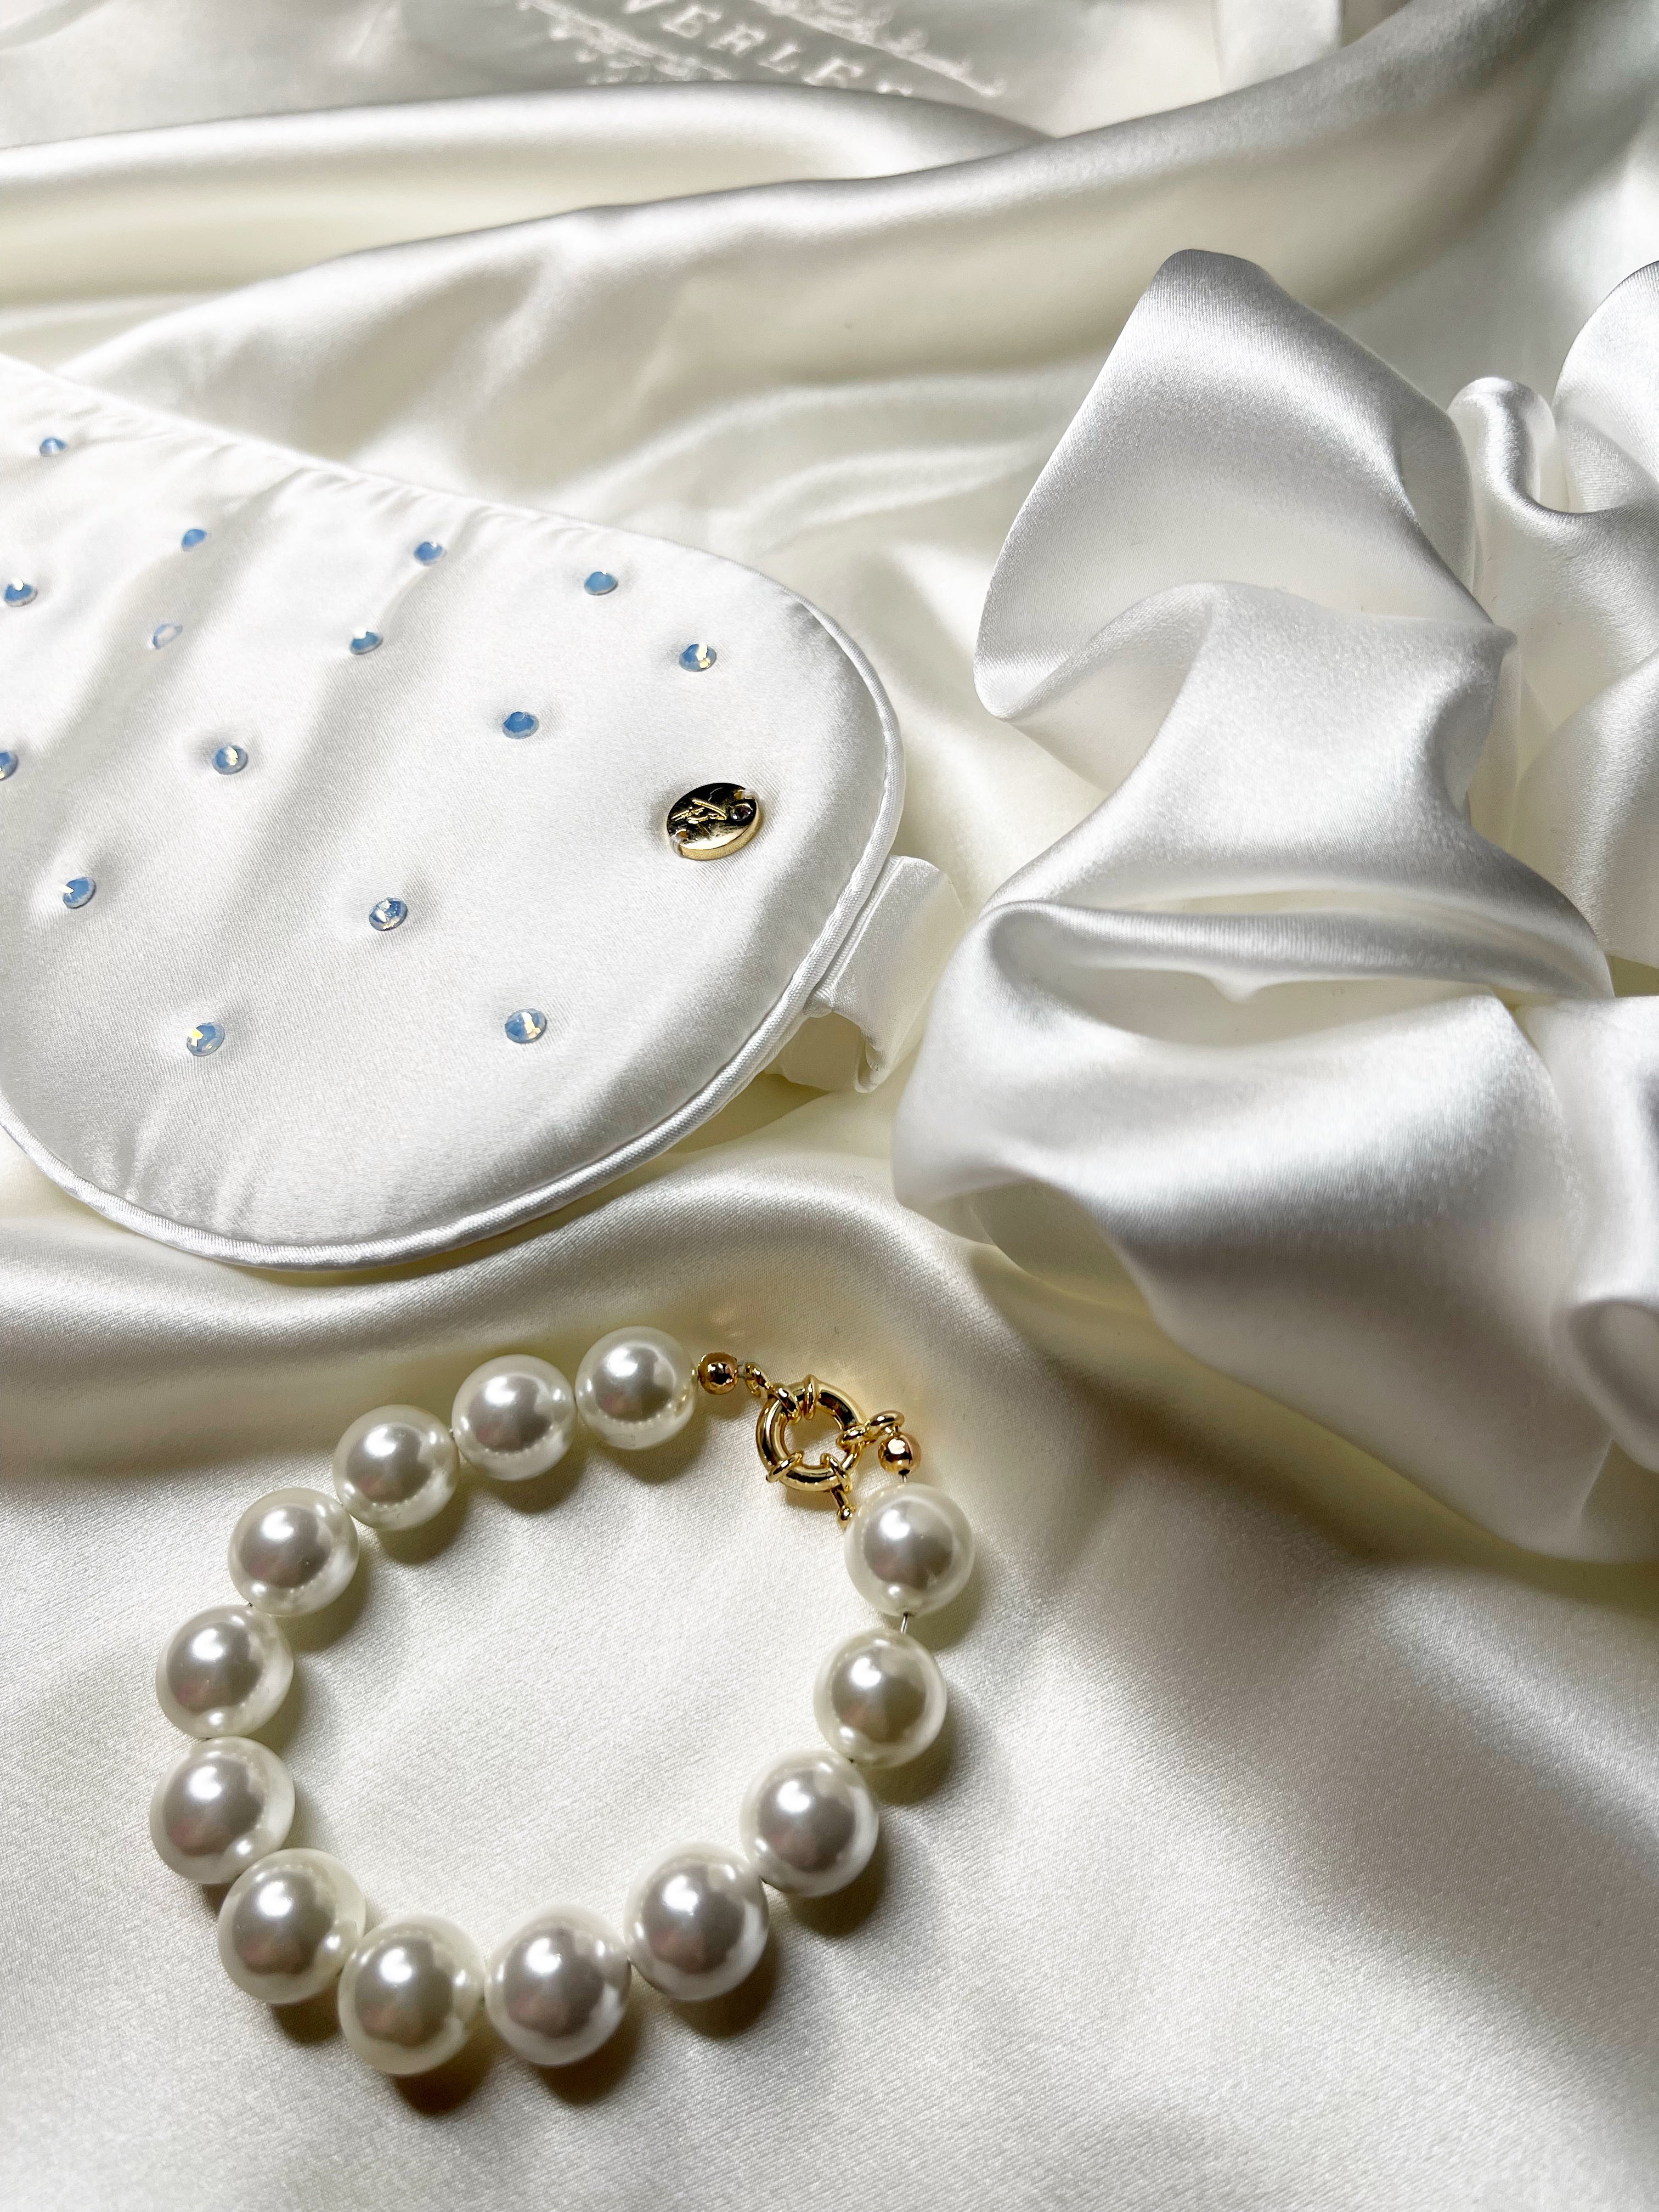 Seashell Pearl Bracelet by Shirley Navone with gold-plated metallic details.